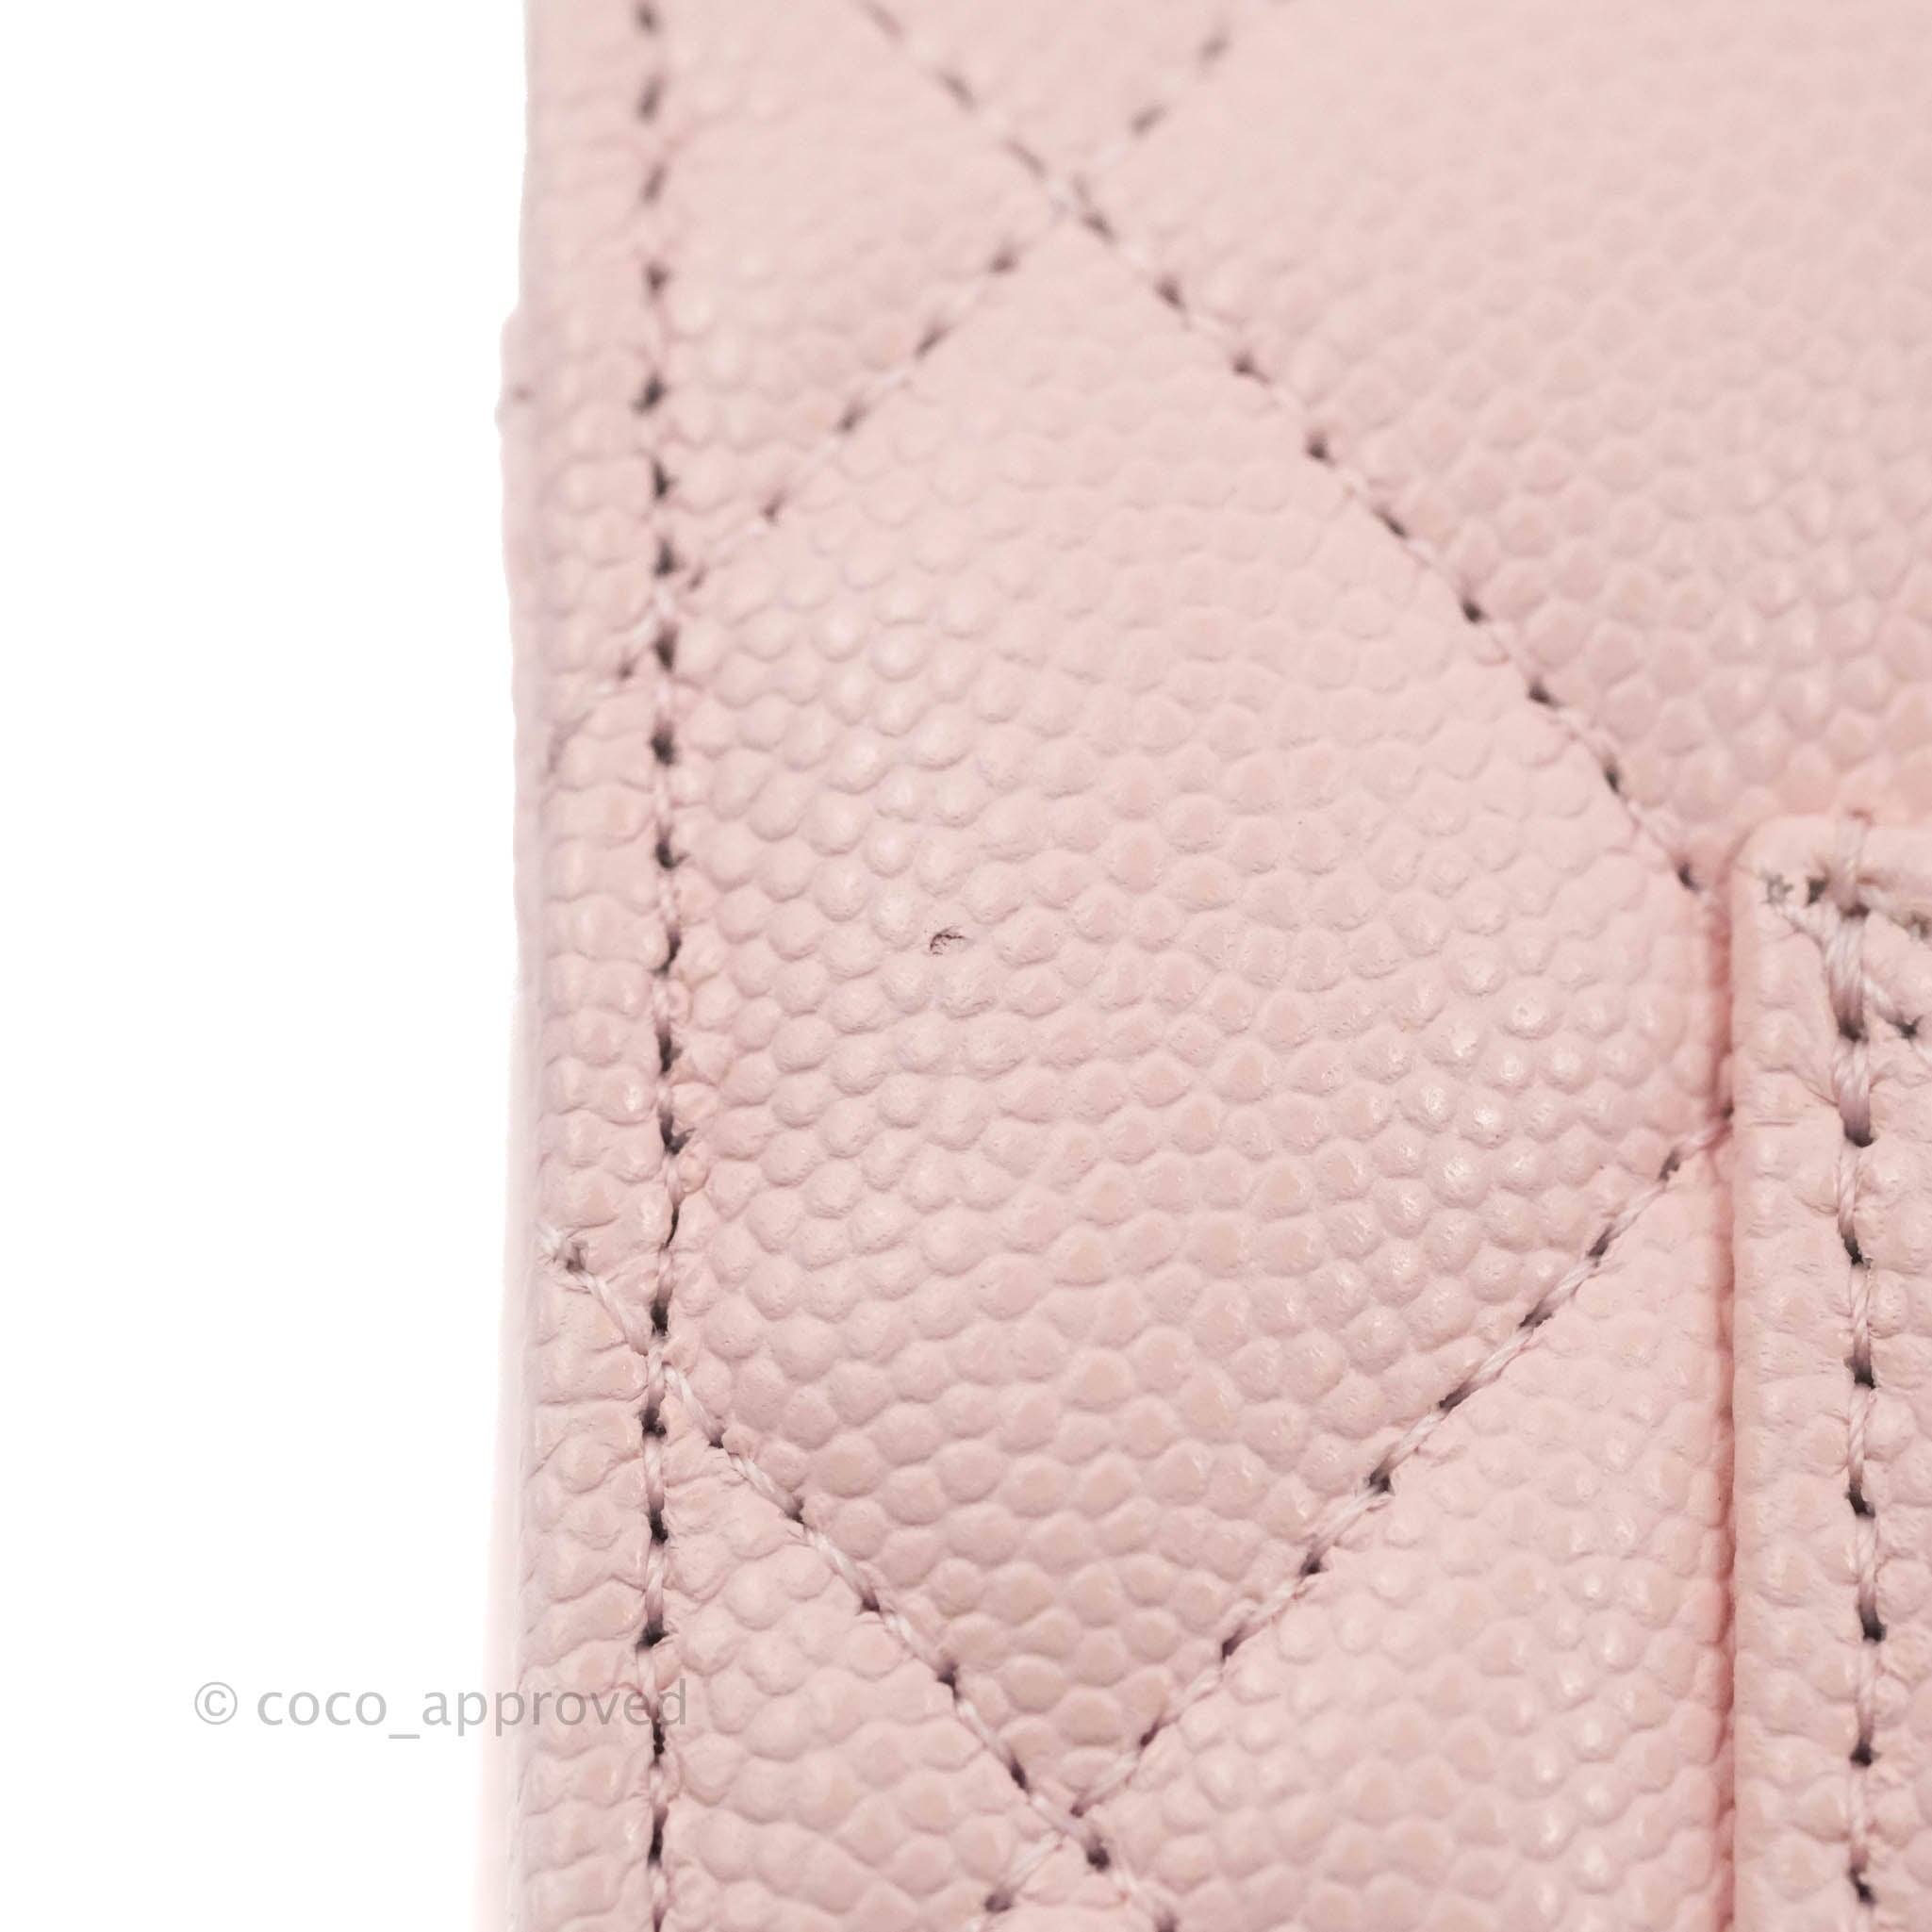 Chanel Pink Quilted Caviar Filigree Compact Wallet Q6A4QZ0FPB000